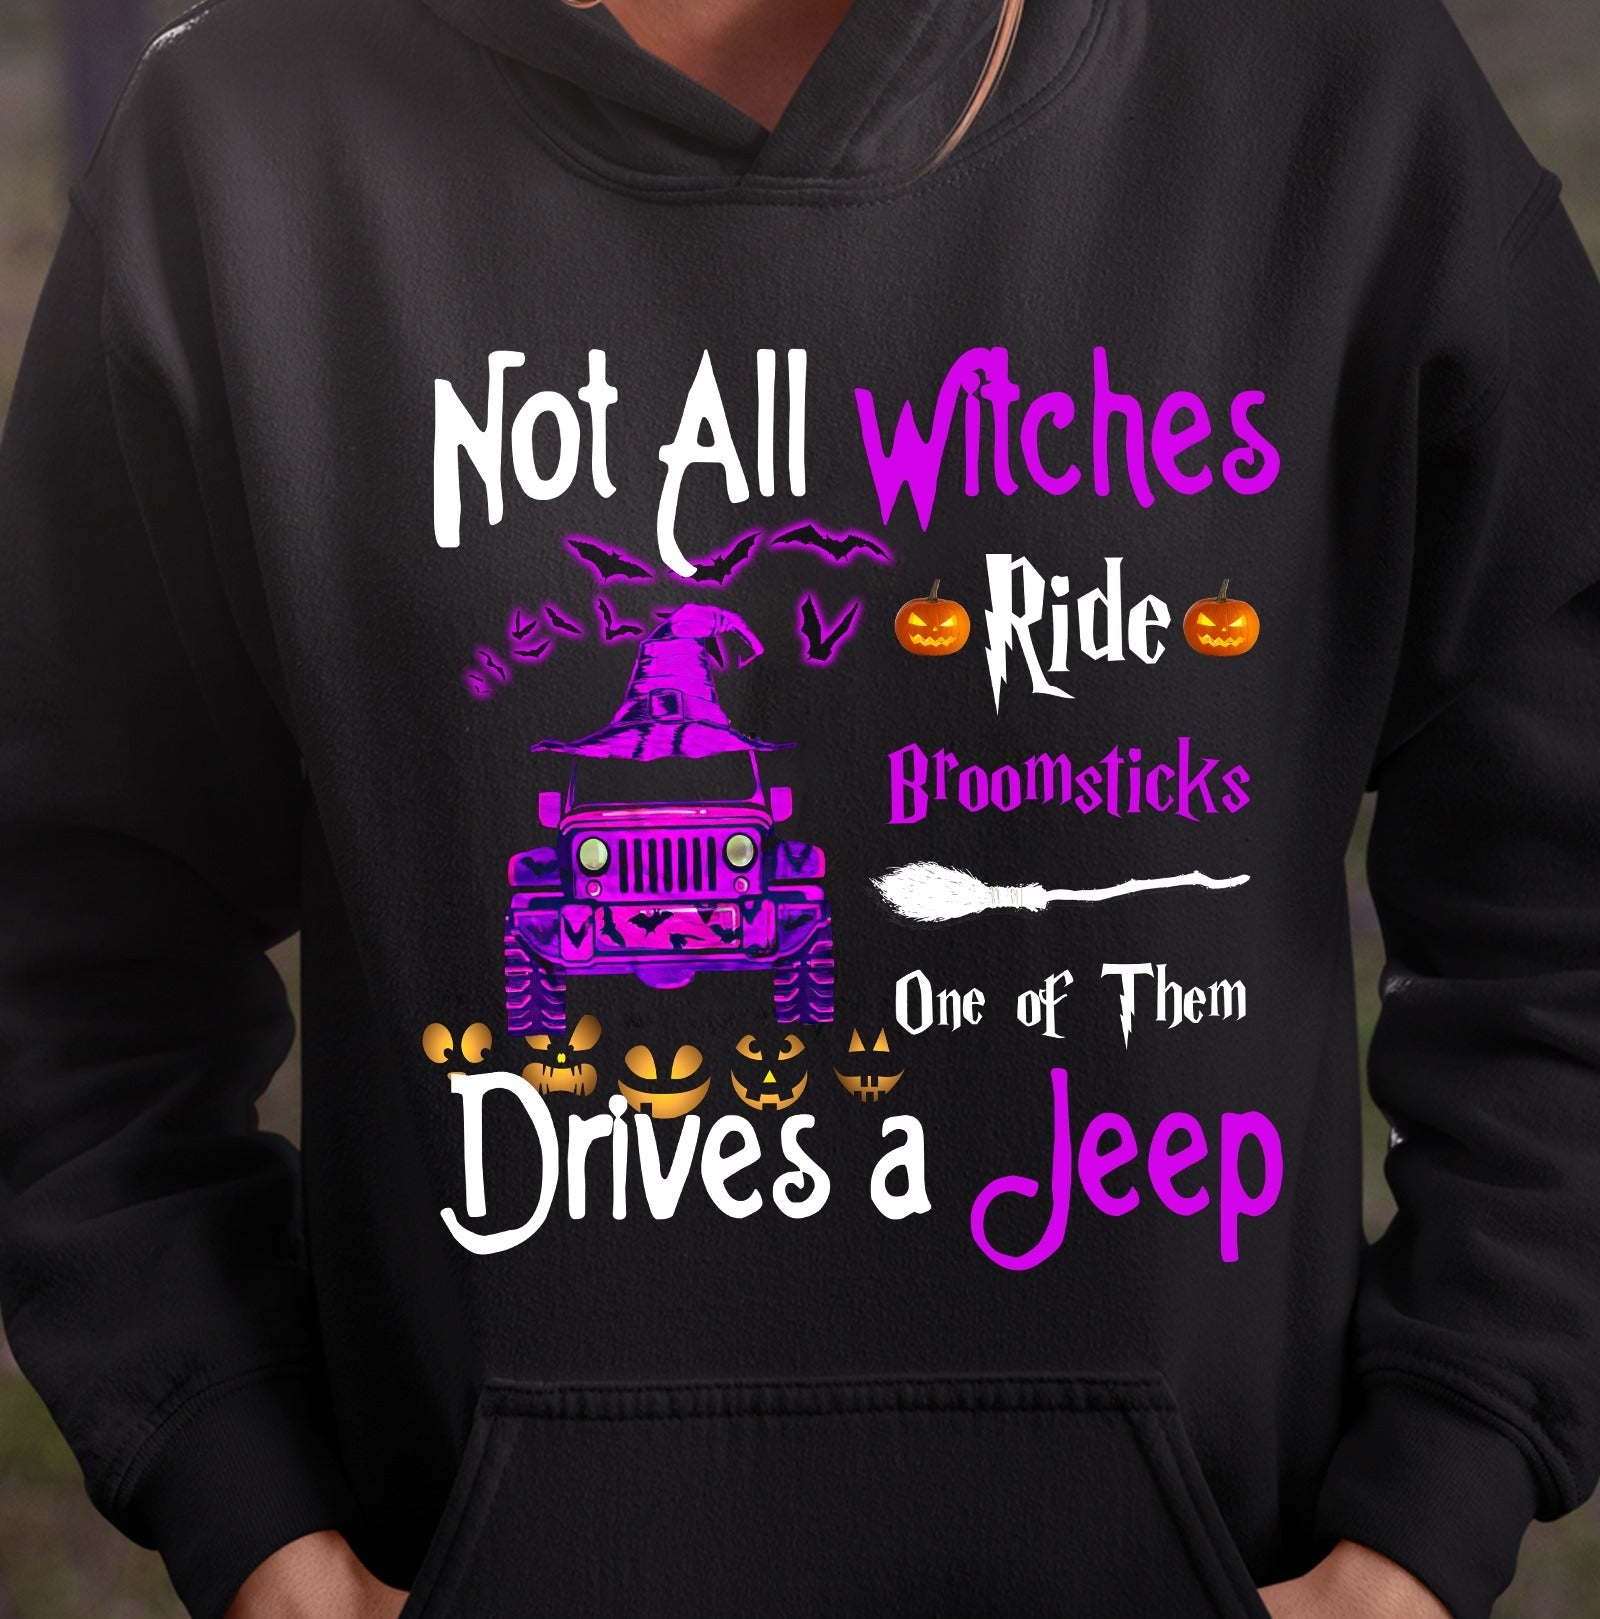 Not All Witches Ride Broomsticks Car T-shirt and Hoodie 0823